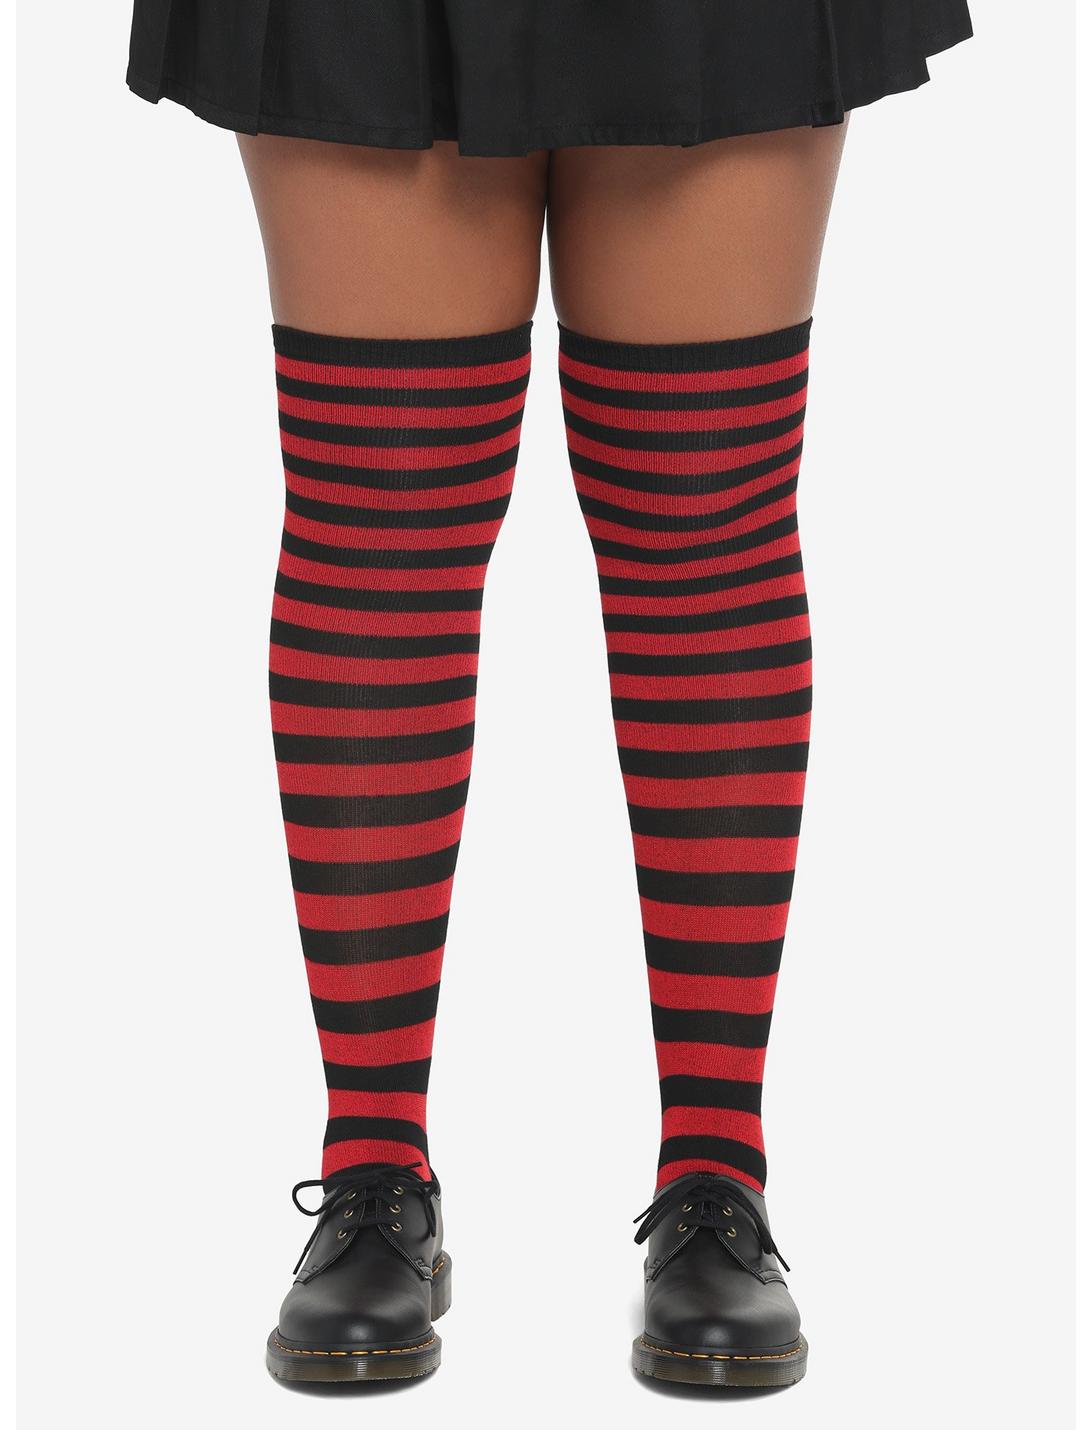 Repellent worship package Red & Black Stripe Thigh-High Socks Plus Size | Hot Topic